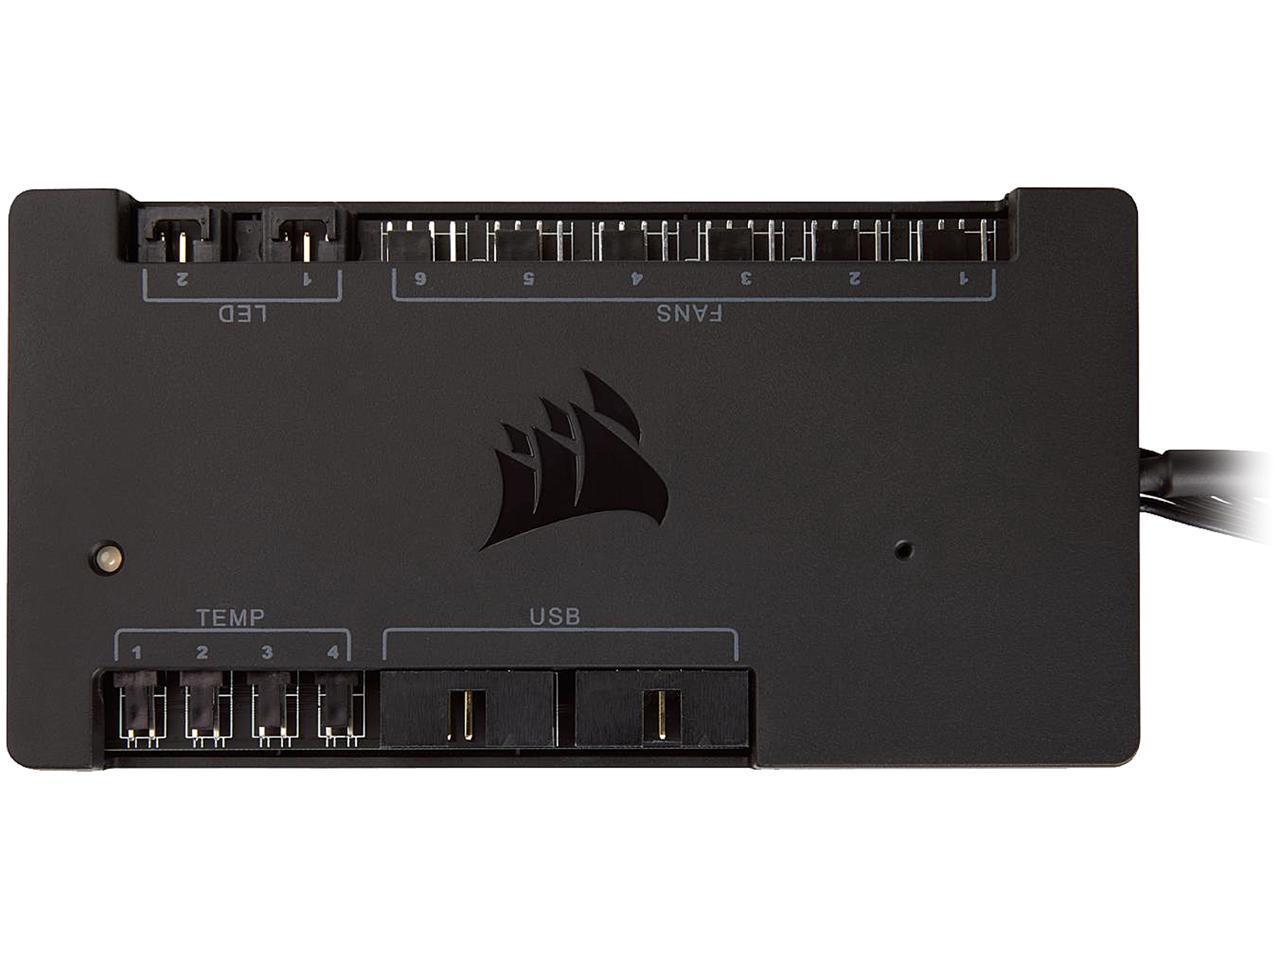 Corsair iCUE Commander PRO Smart RGB Lighting and Fan Speed Controller for $49.99